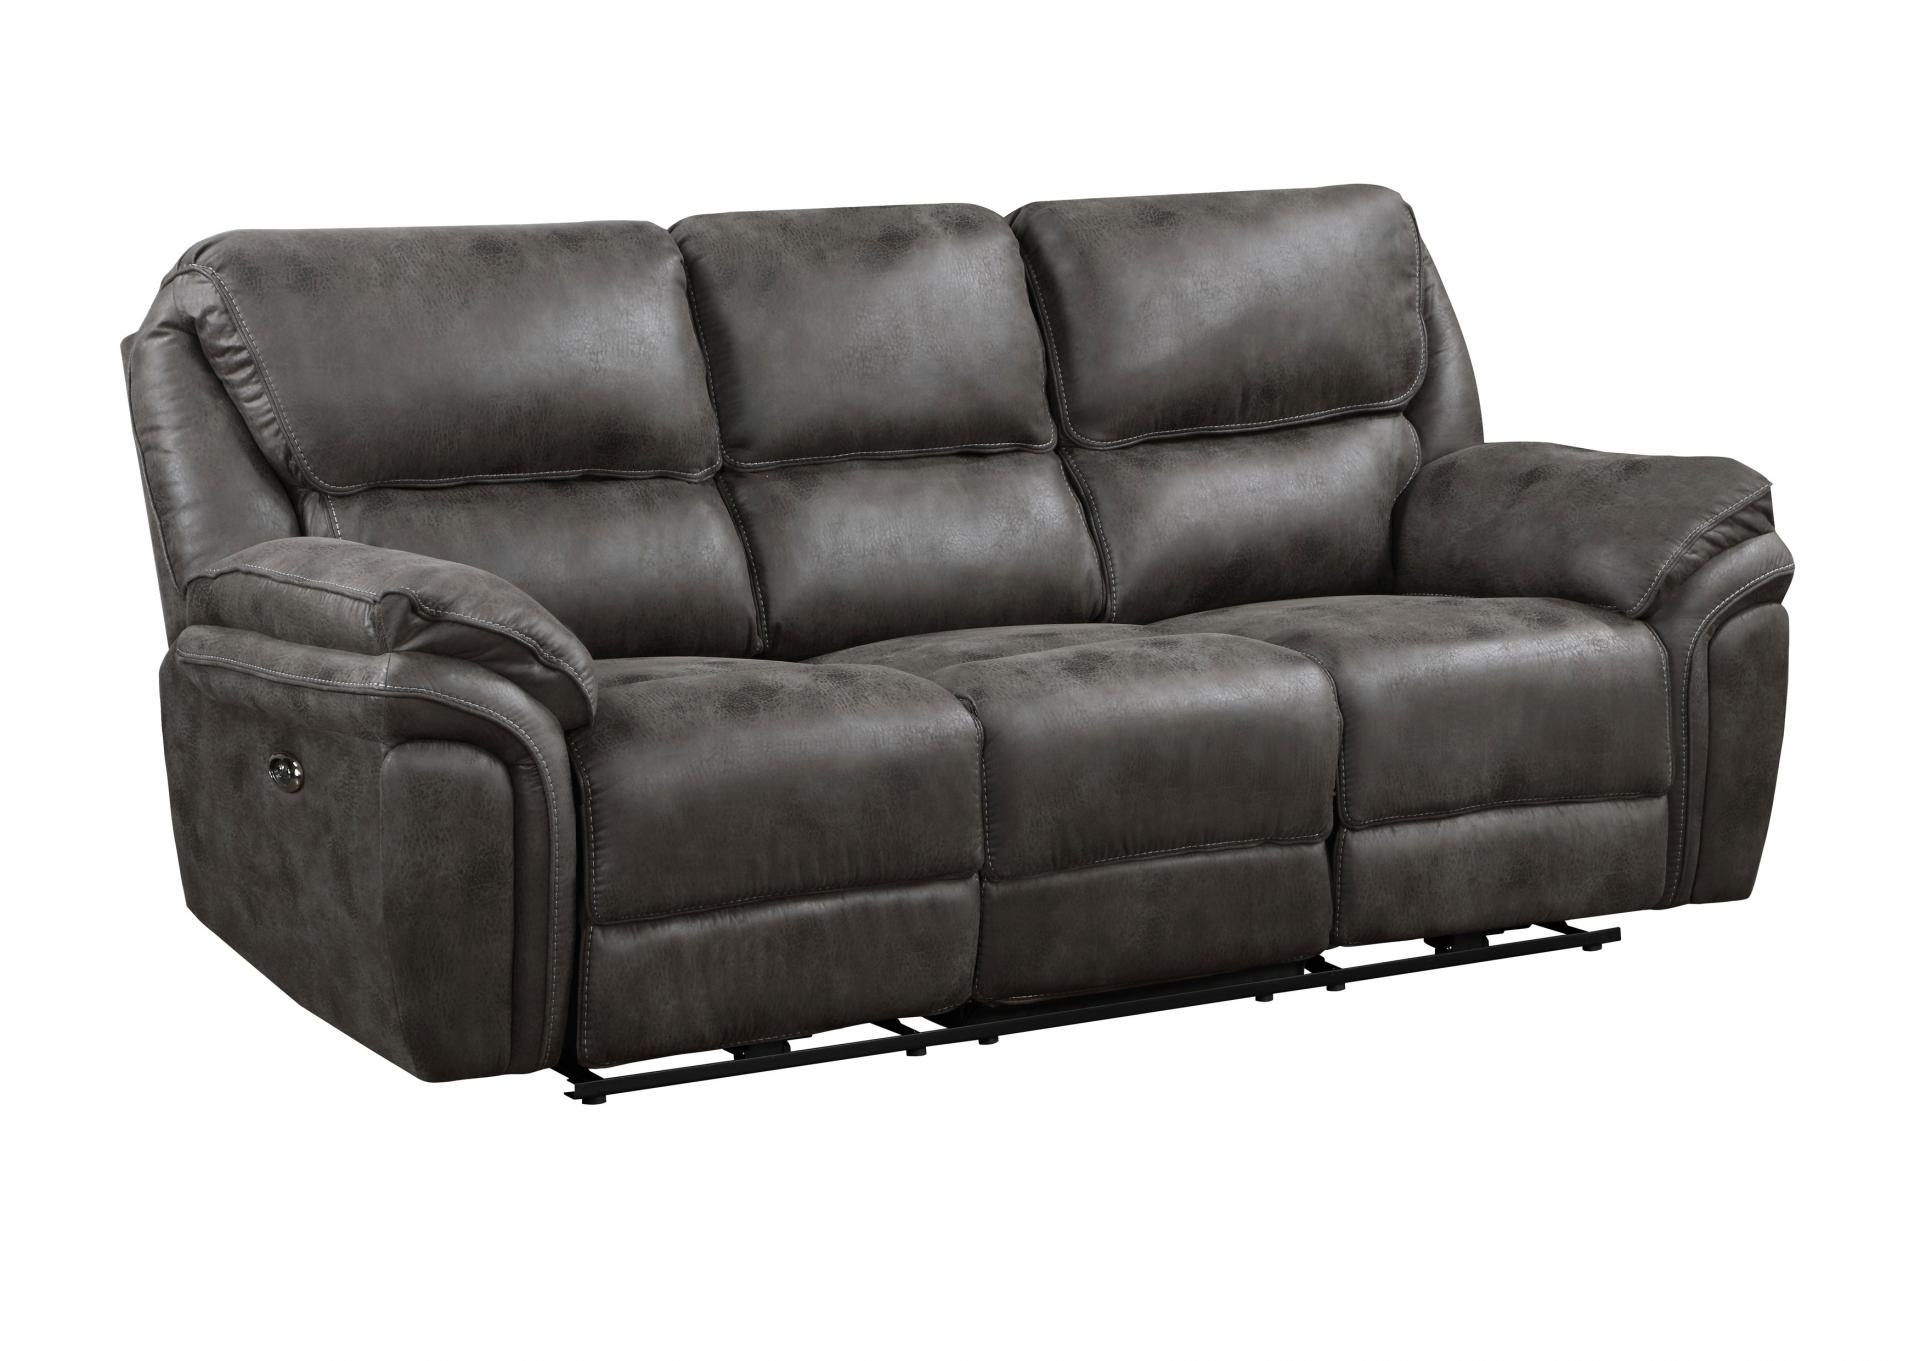 Proctor Power Double Reclining Sofa in Gray,Homelegance